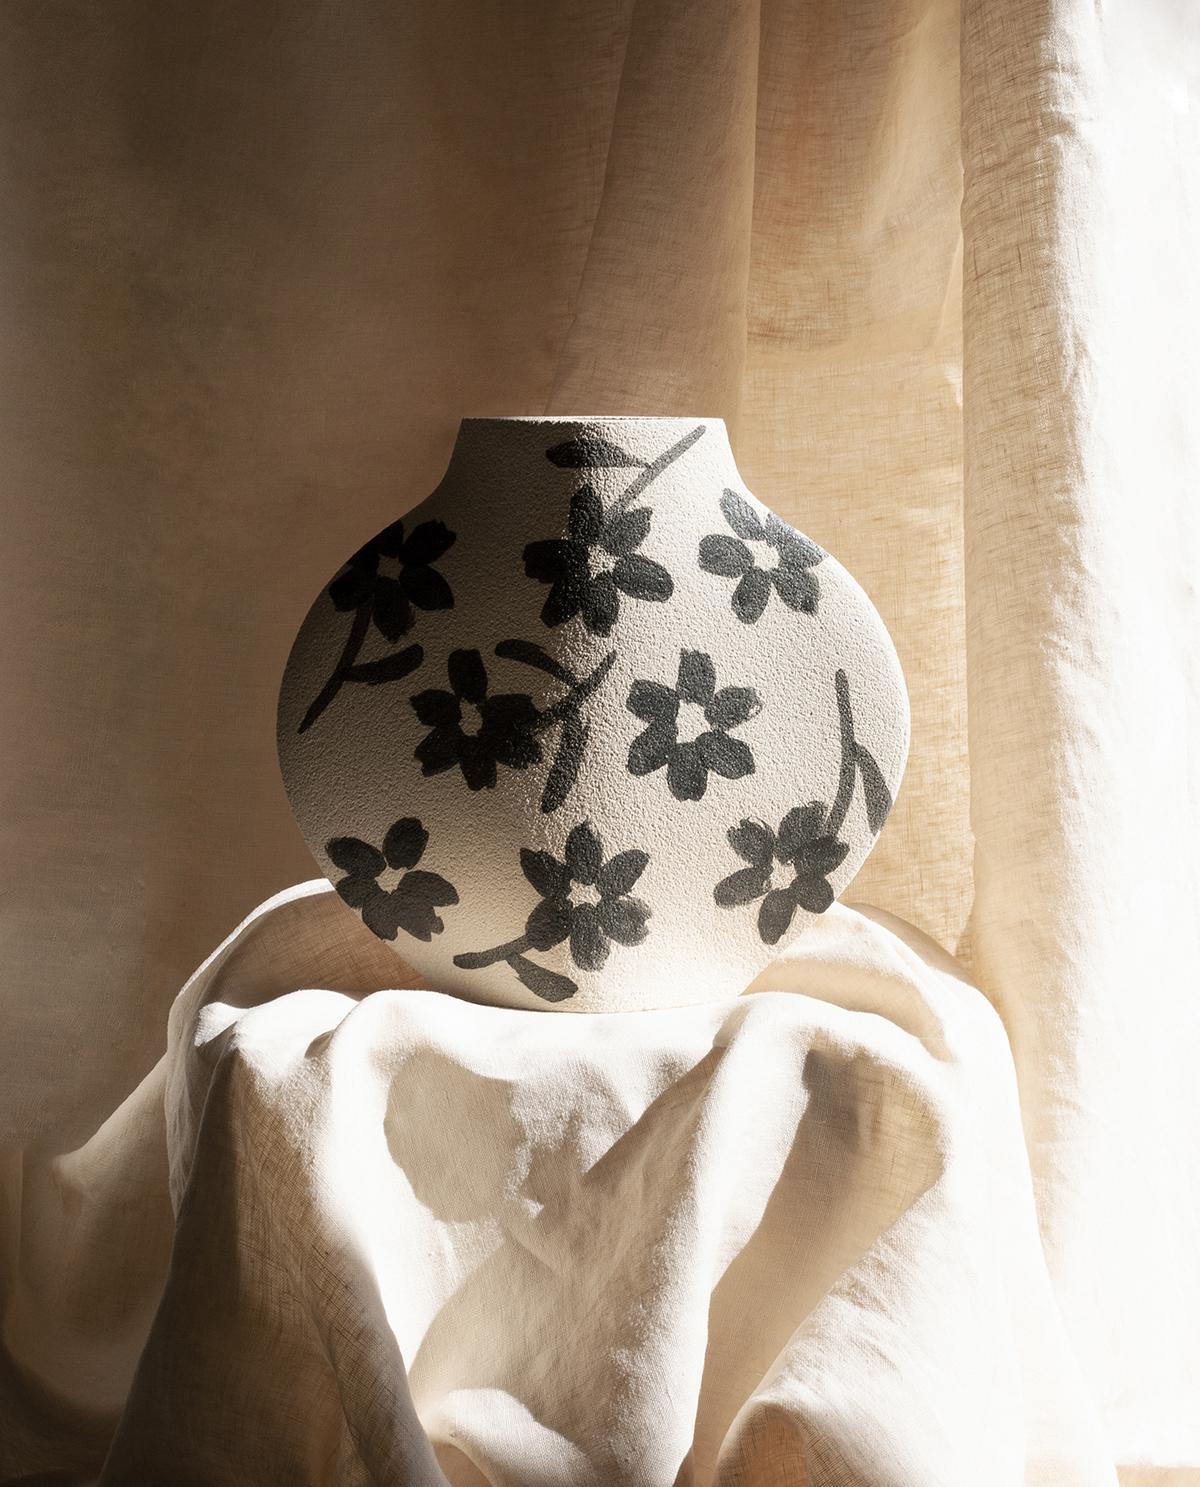 21st Century 'Flowers Pattern' Vase in White Ceramic, Hand-Crafted in France For Sale 2